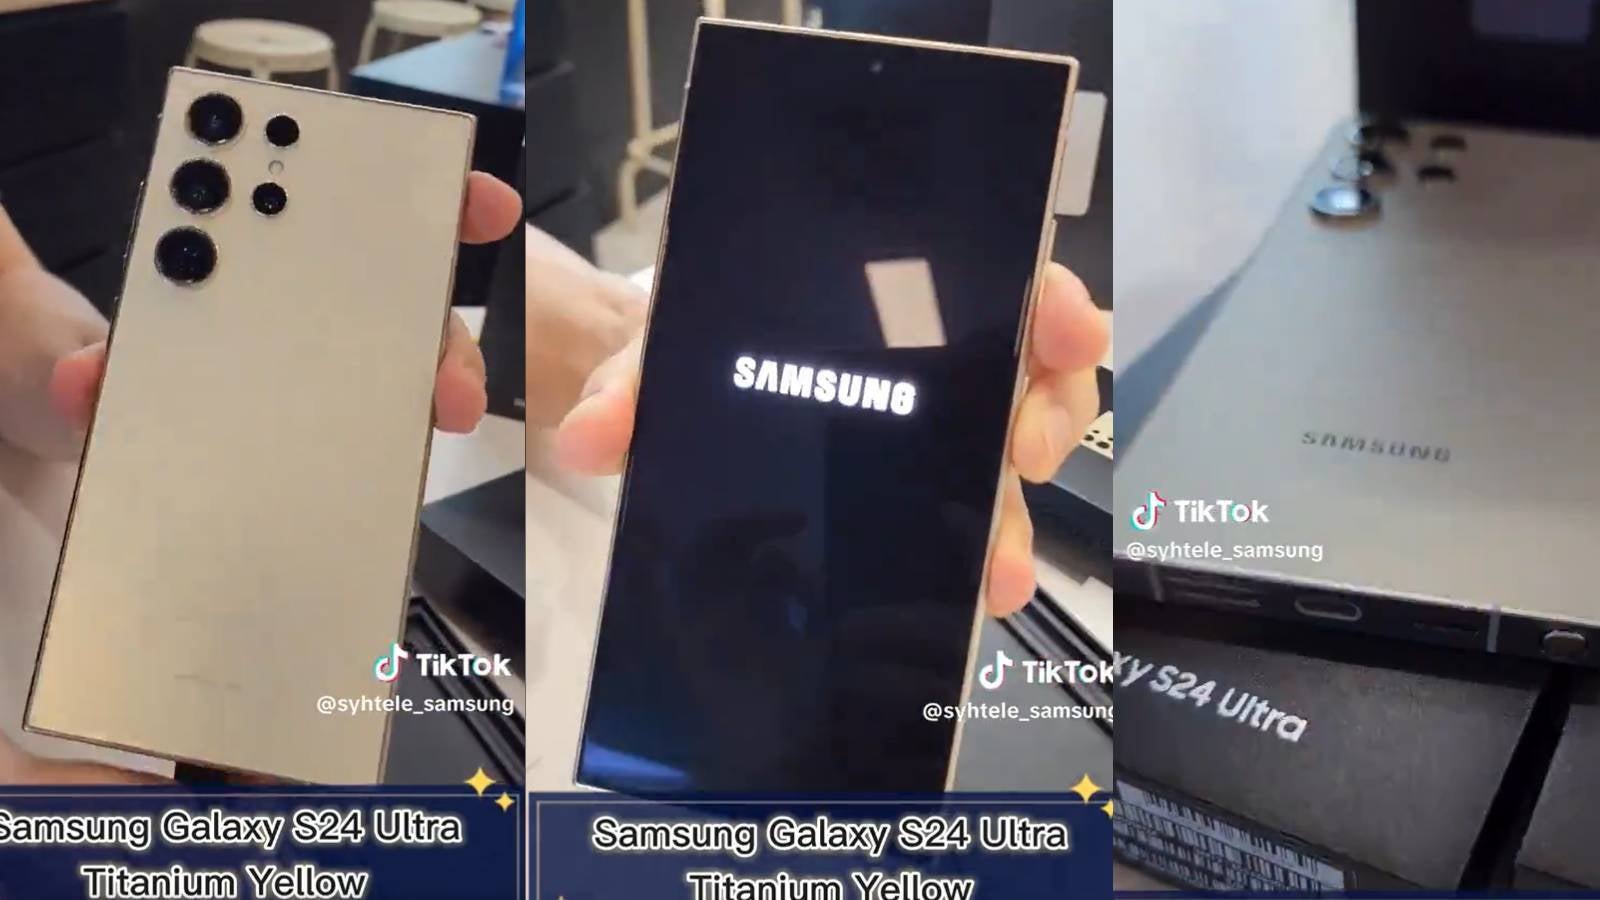 X user is playing with fire as they post Galaxy S24 Ultra unboxing